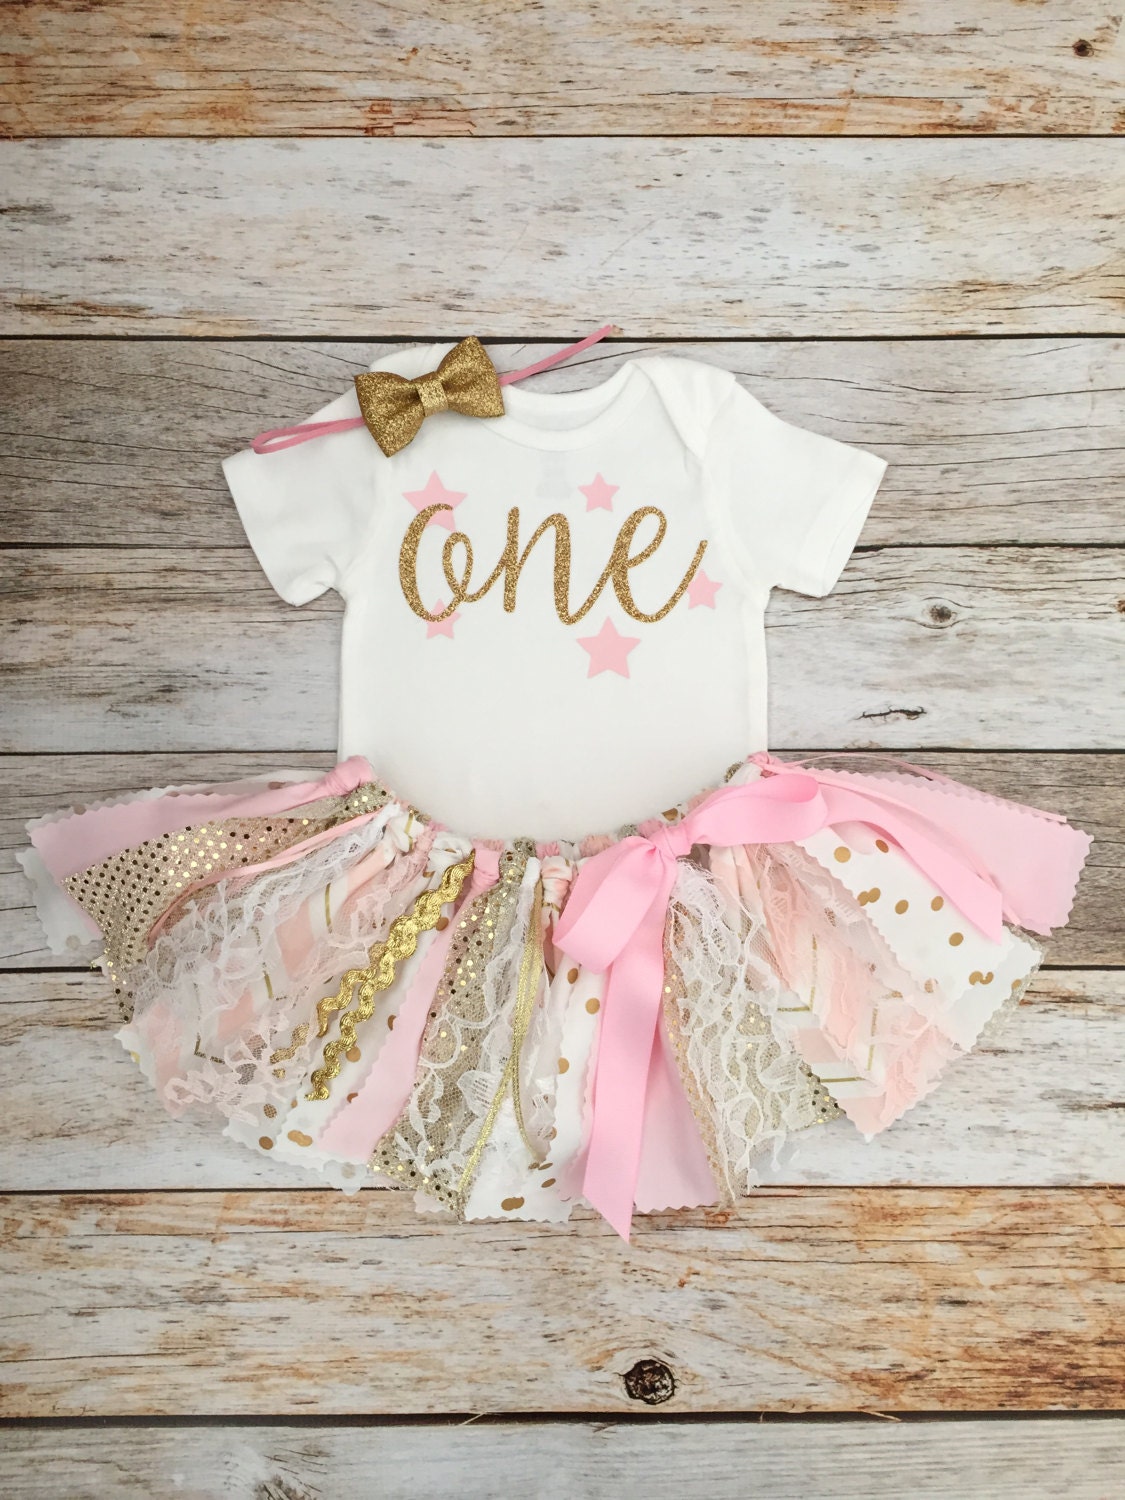 Baby Girl Pink and Gold First Birthday Outfit Pink and Gold Sparkly Arrow Birthday Outfit with Gold Bow Headband Pink and Gold Fabric Tutu